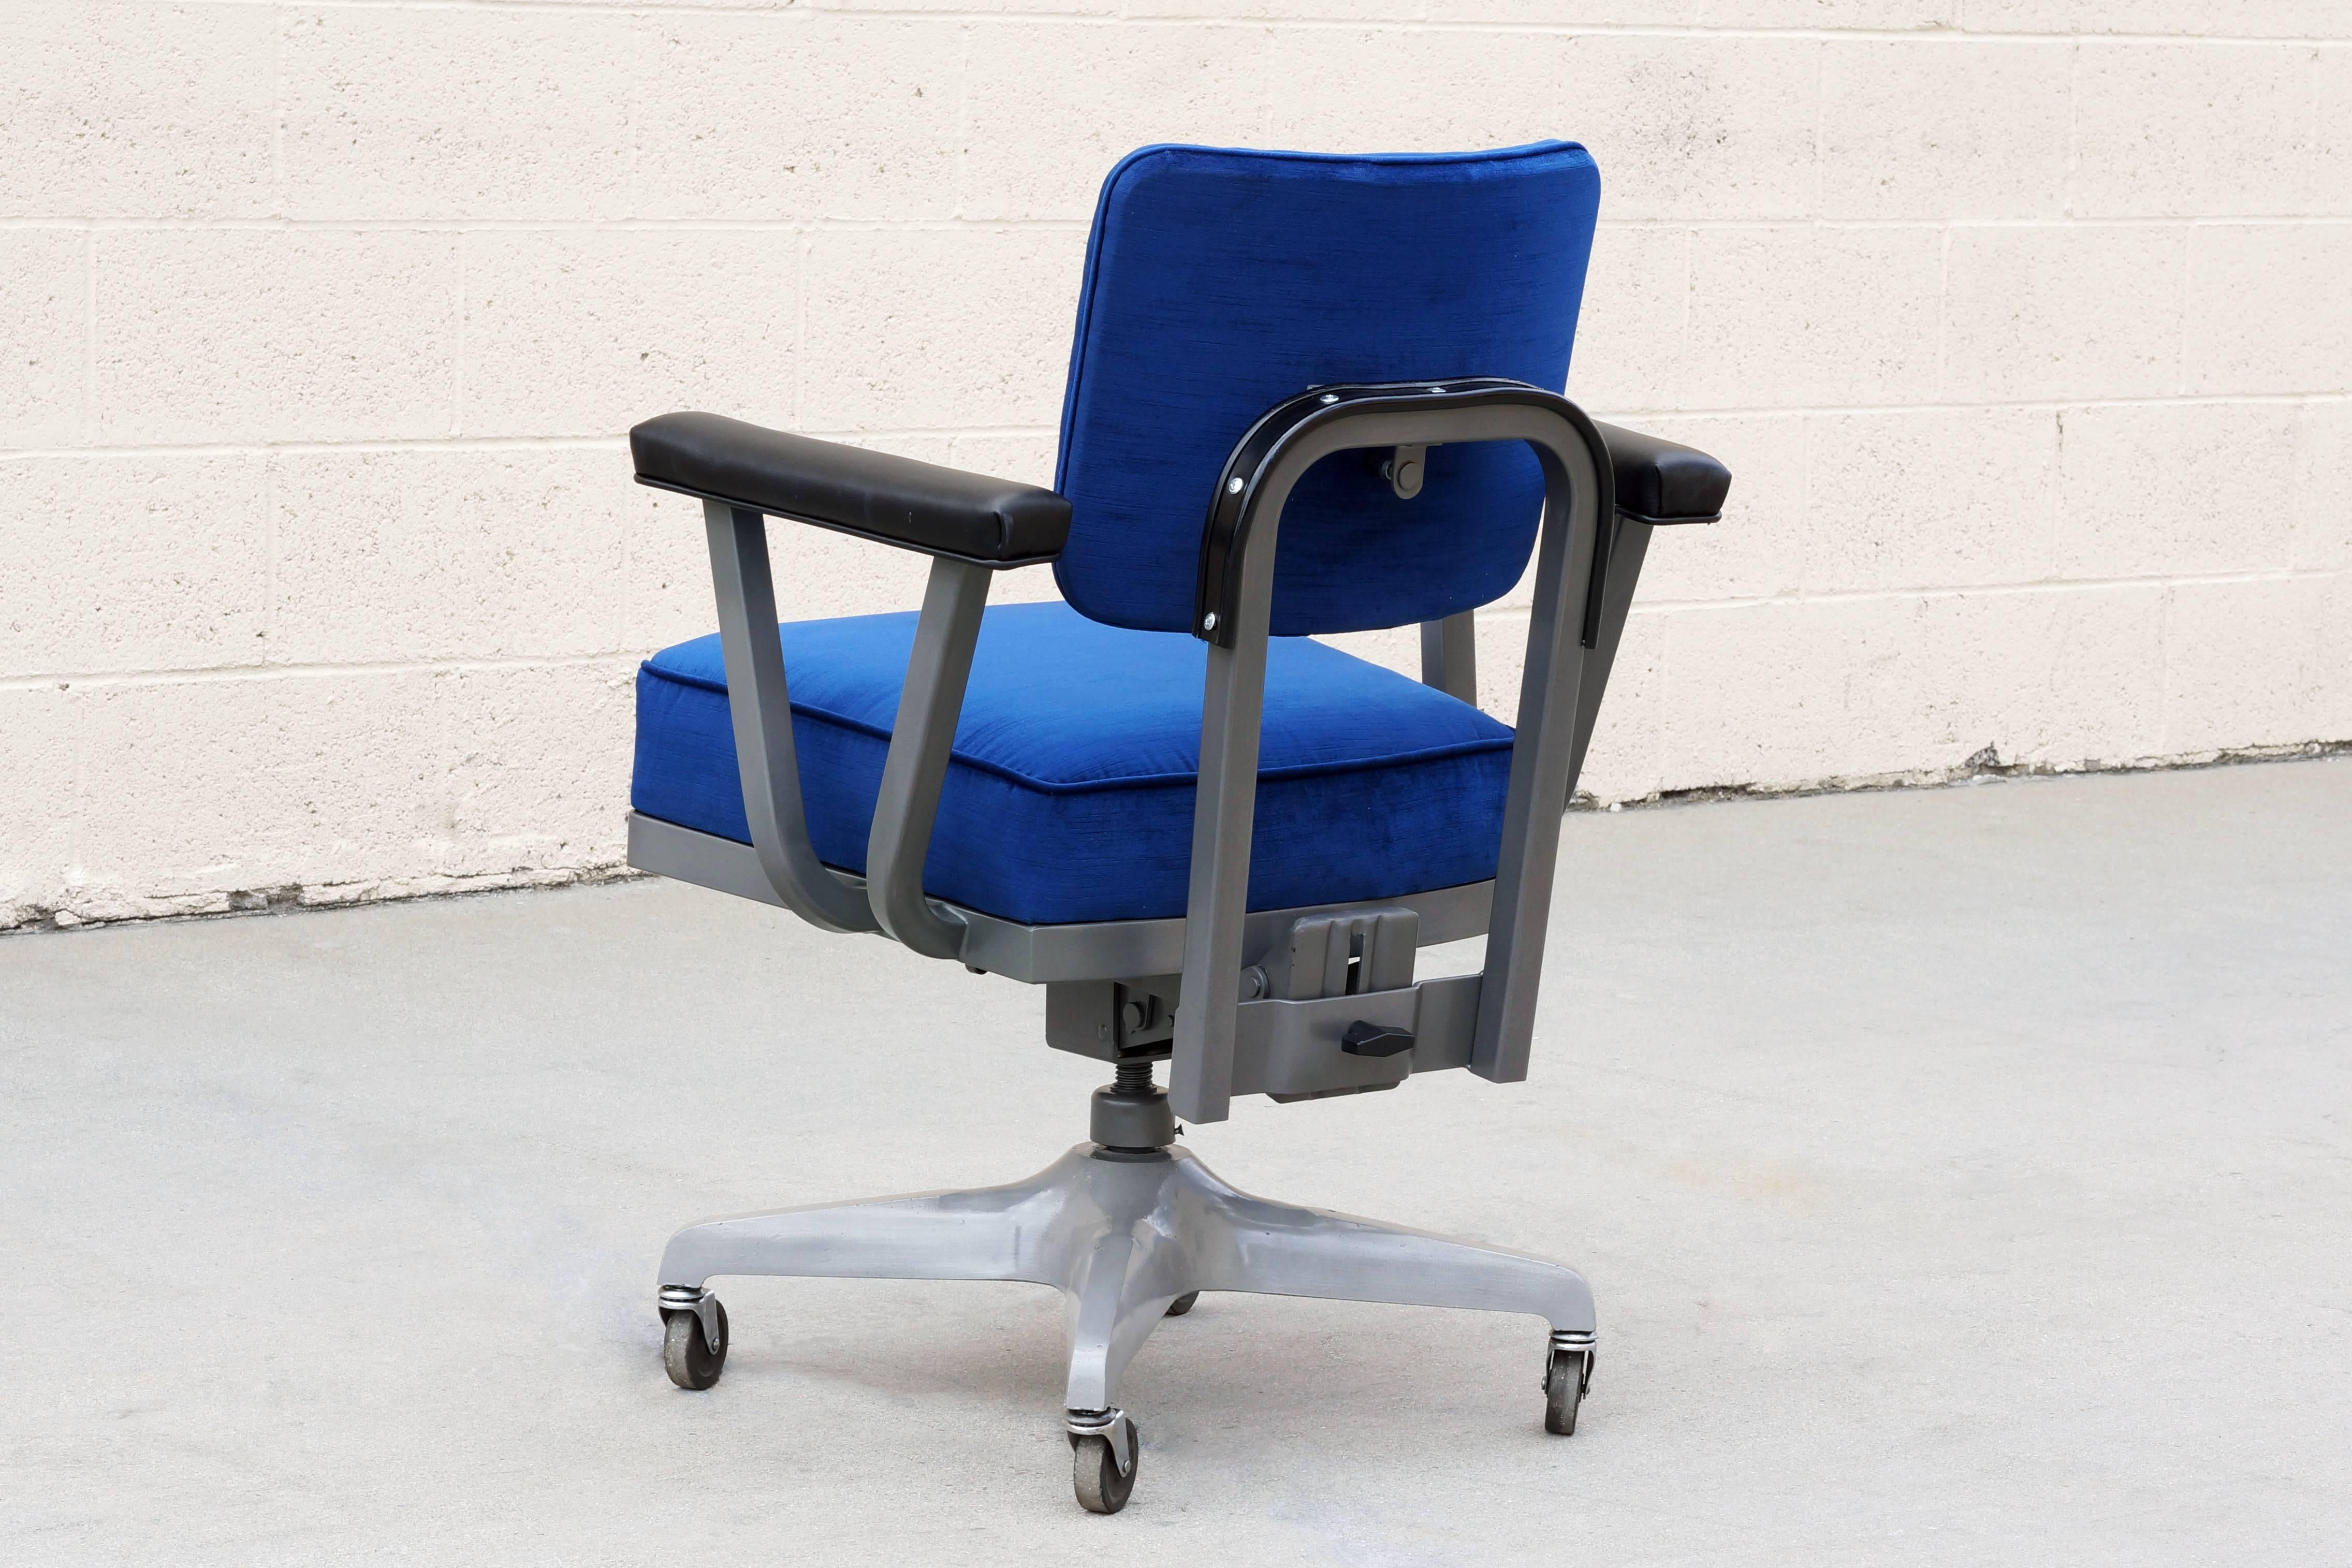 1960s steno desk chair by Steelcase with uncommon, articulated steel frame. We gave the frame a 